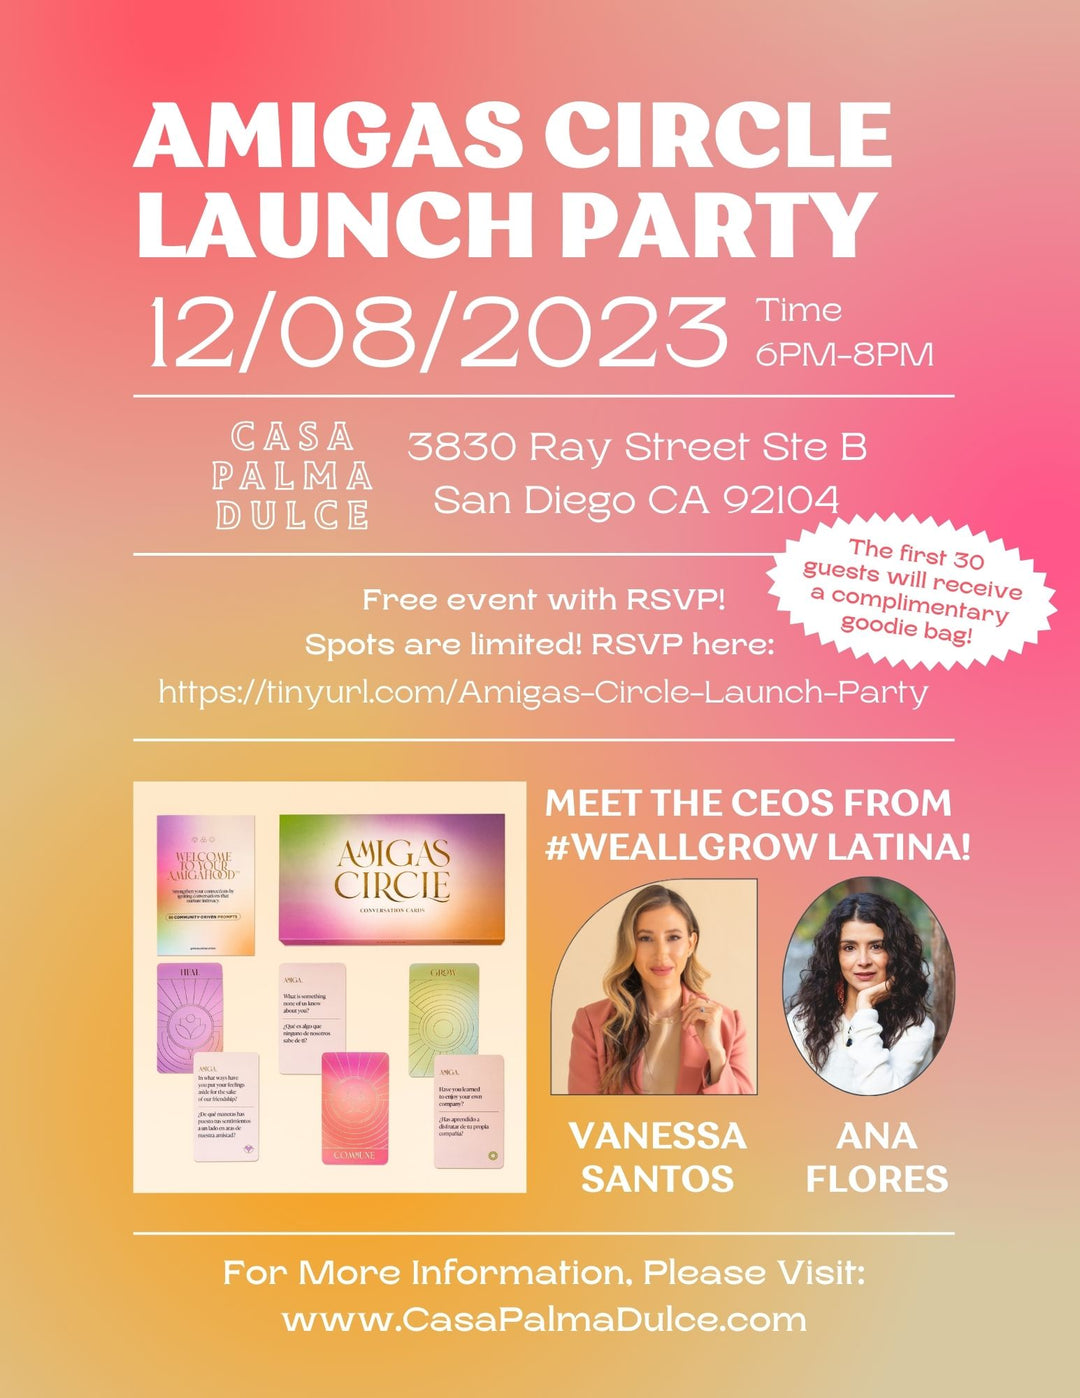 Flyer for Amigas Circle Launch Party Event